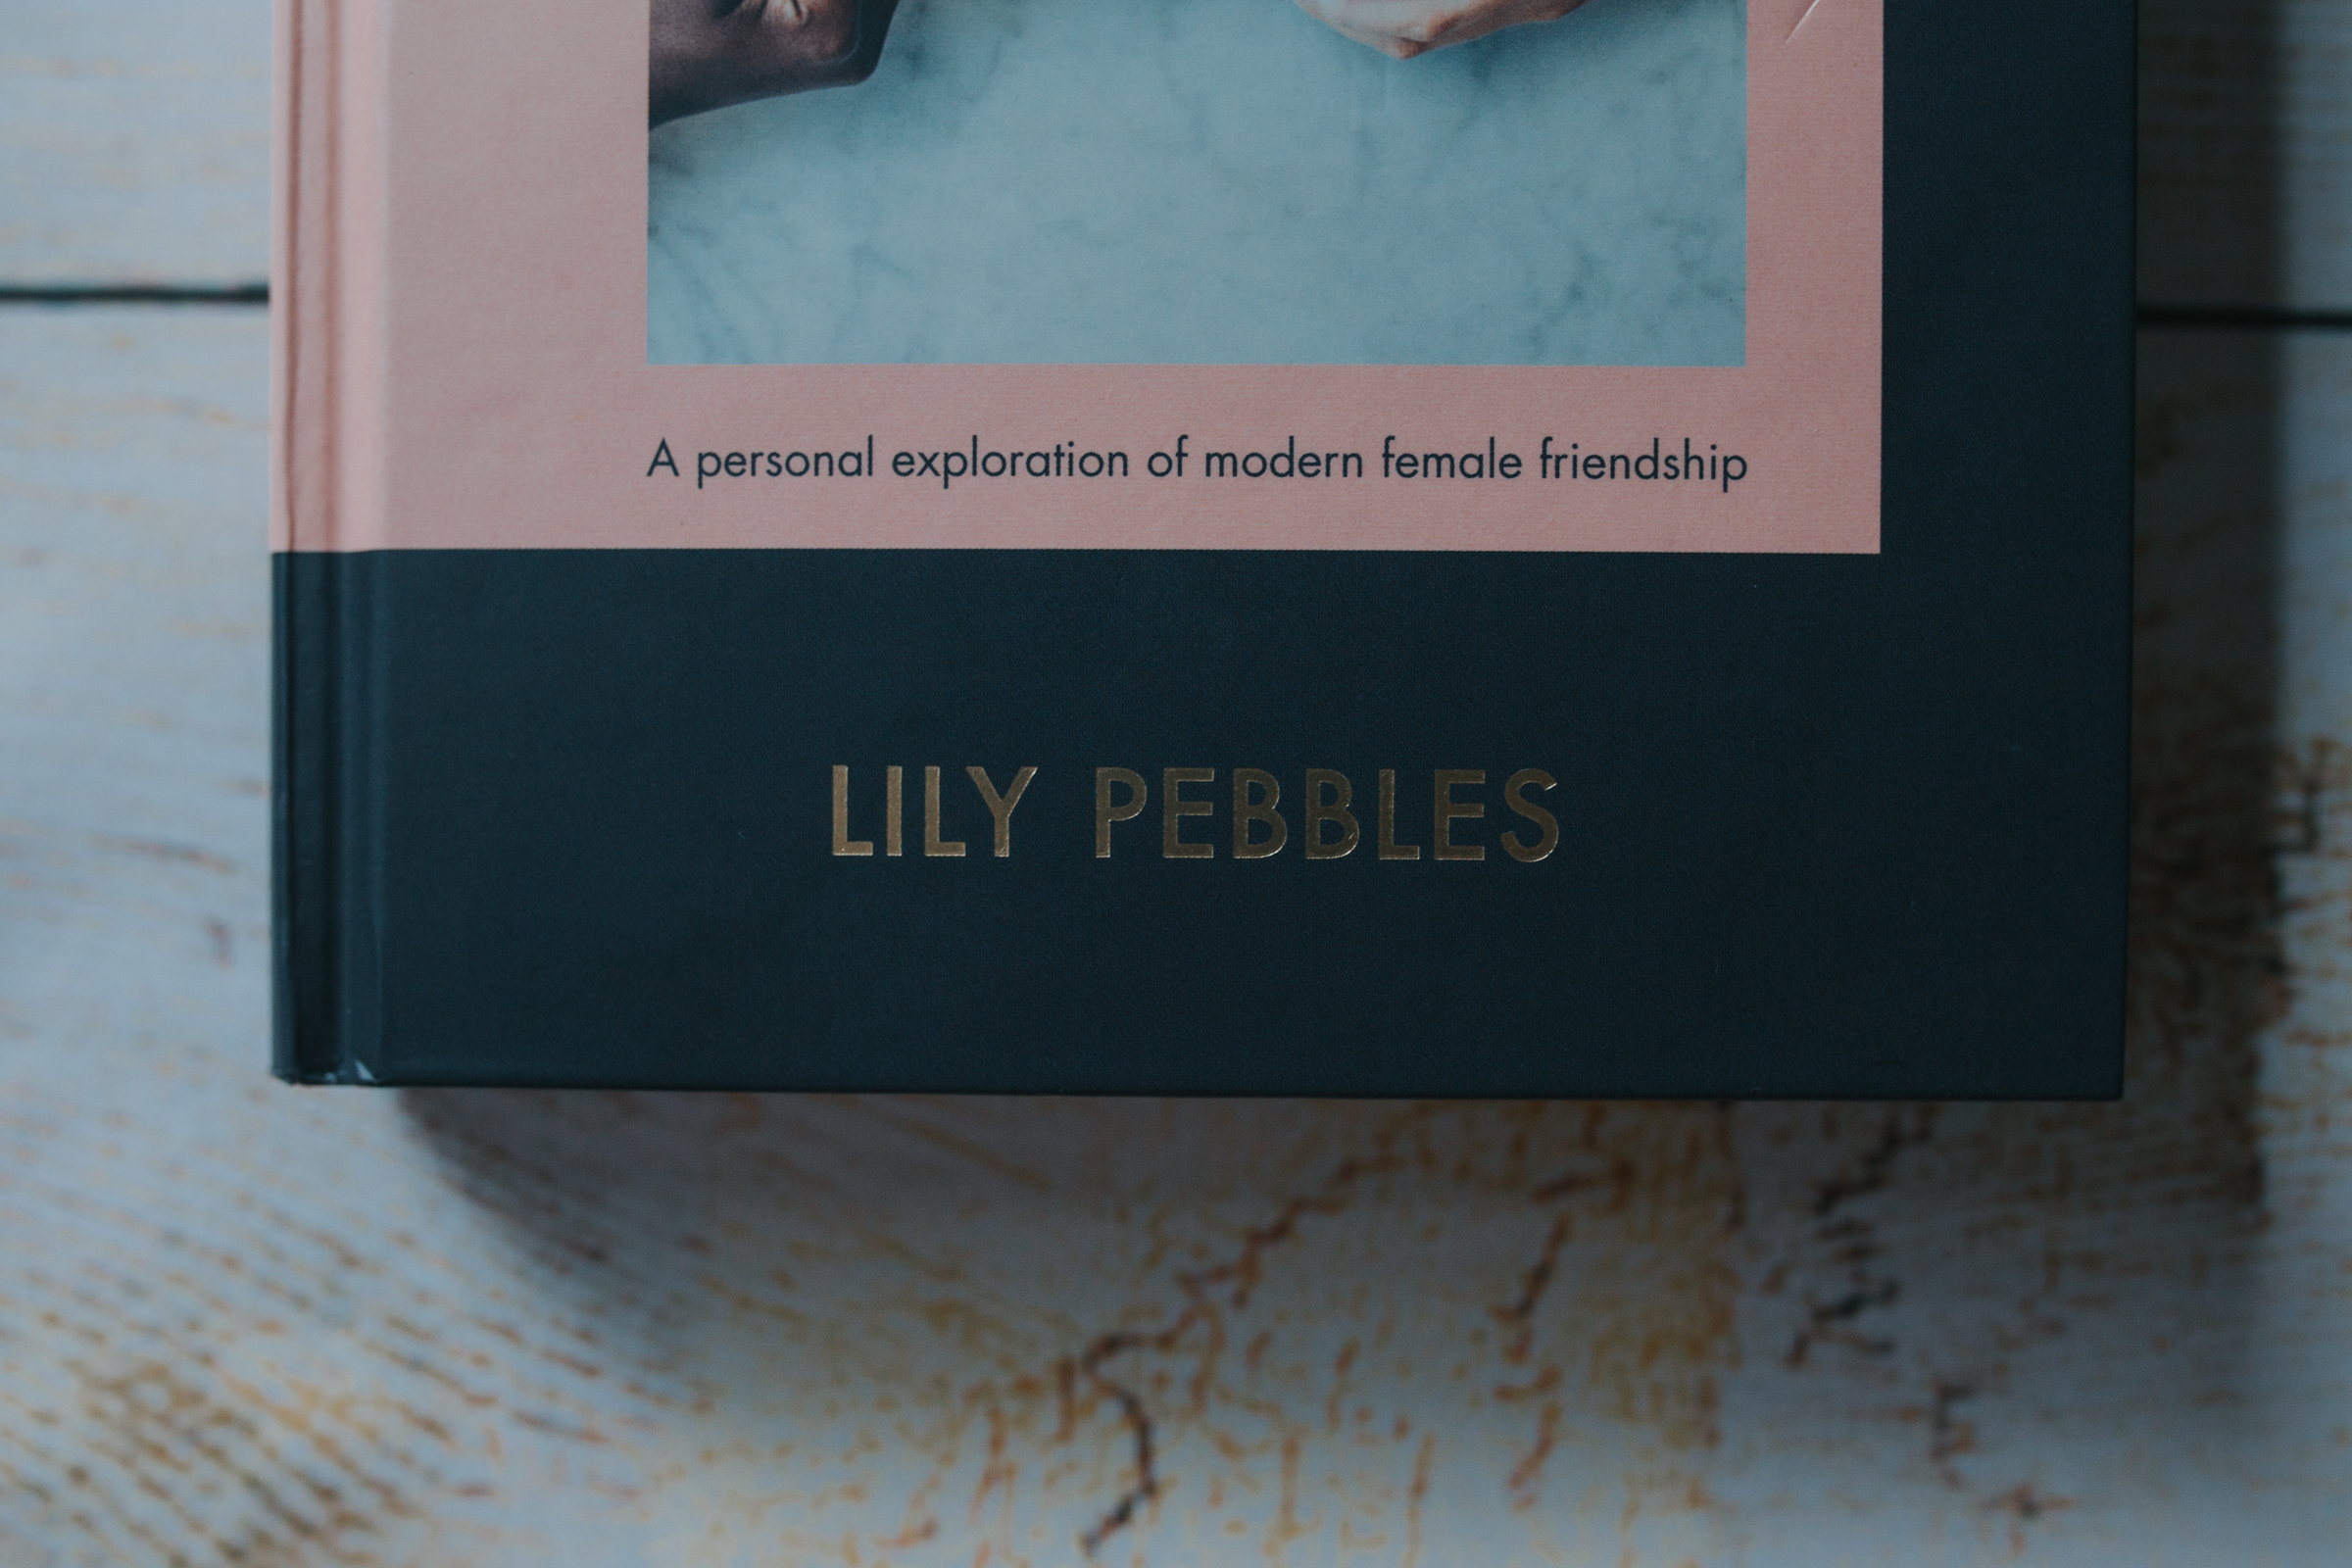 book-review-the-f-word-by-lily-pebbles-minas-planet-london-blogger-jasmina-haskovic1.jpg